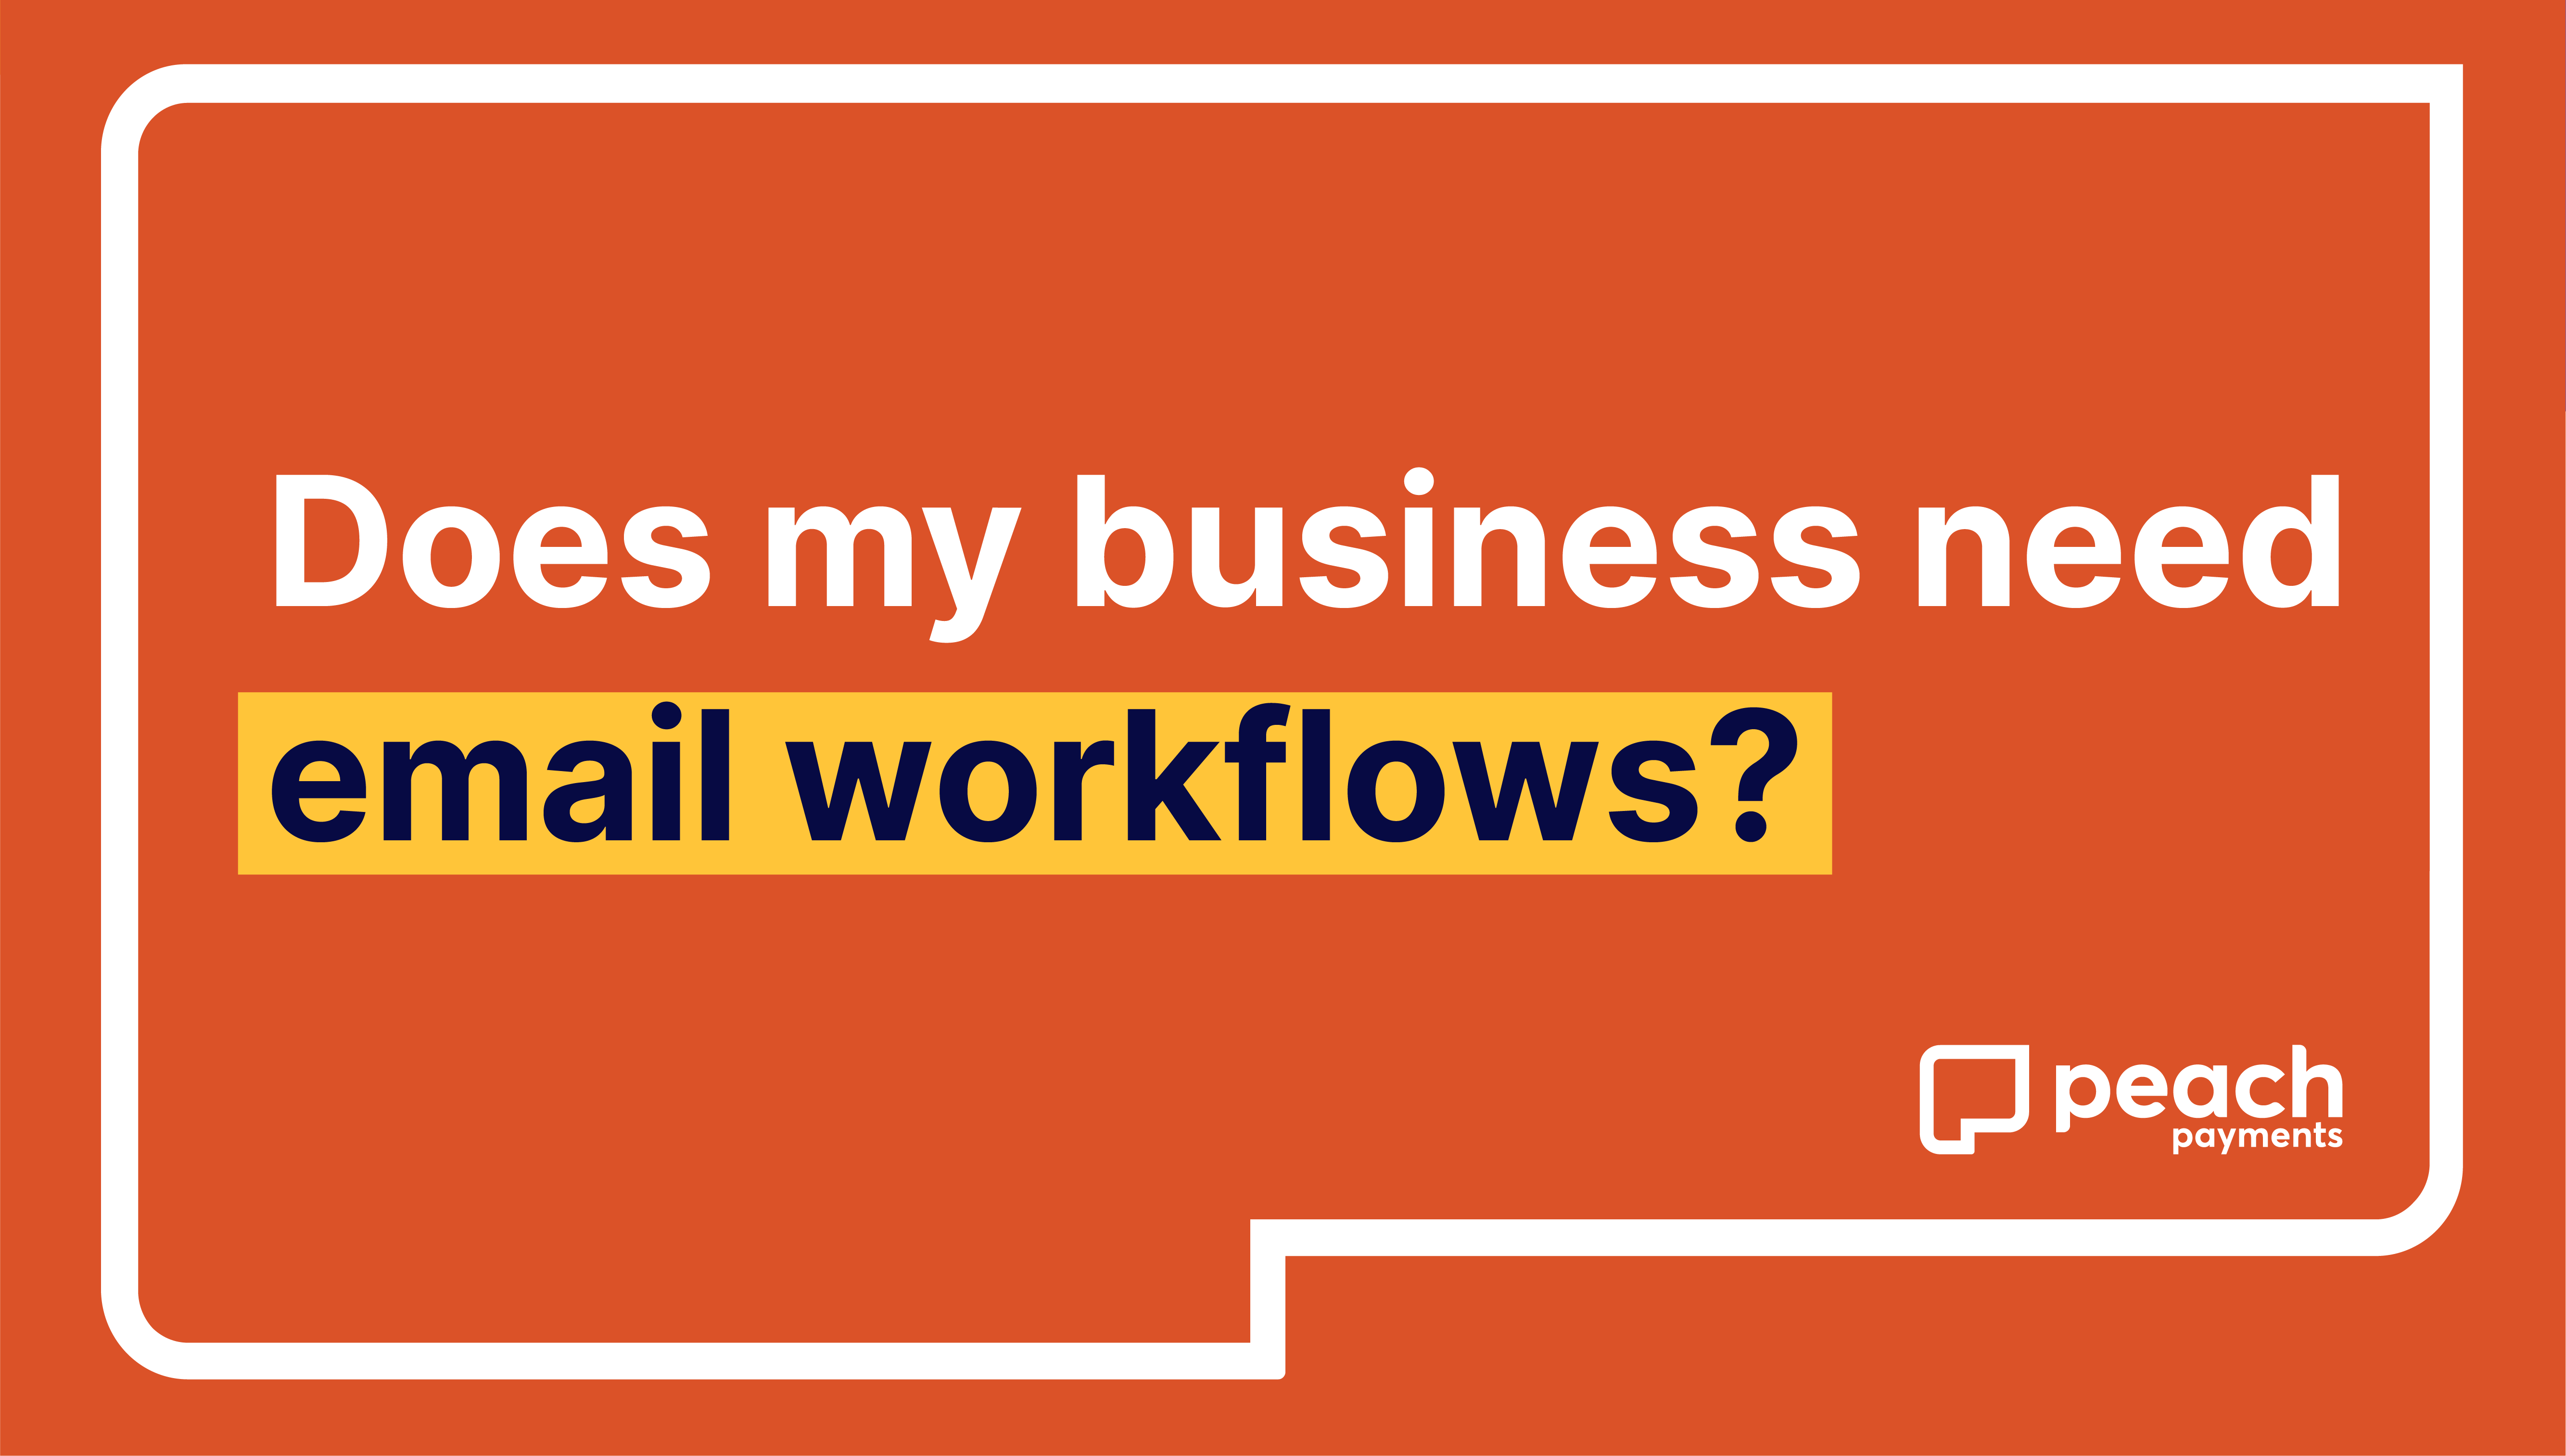 Does my business need email workflows?